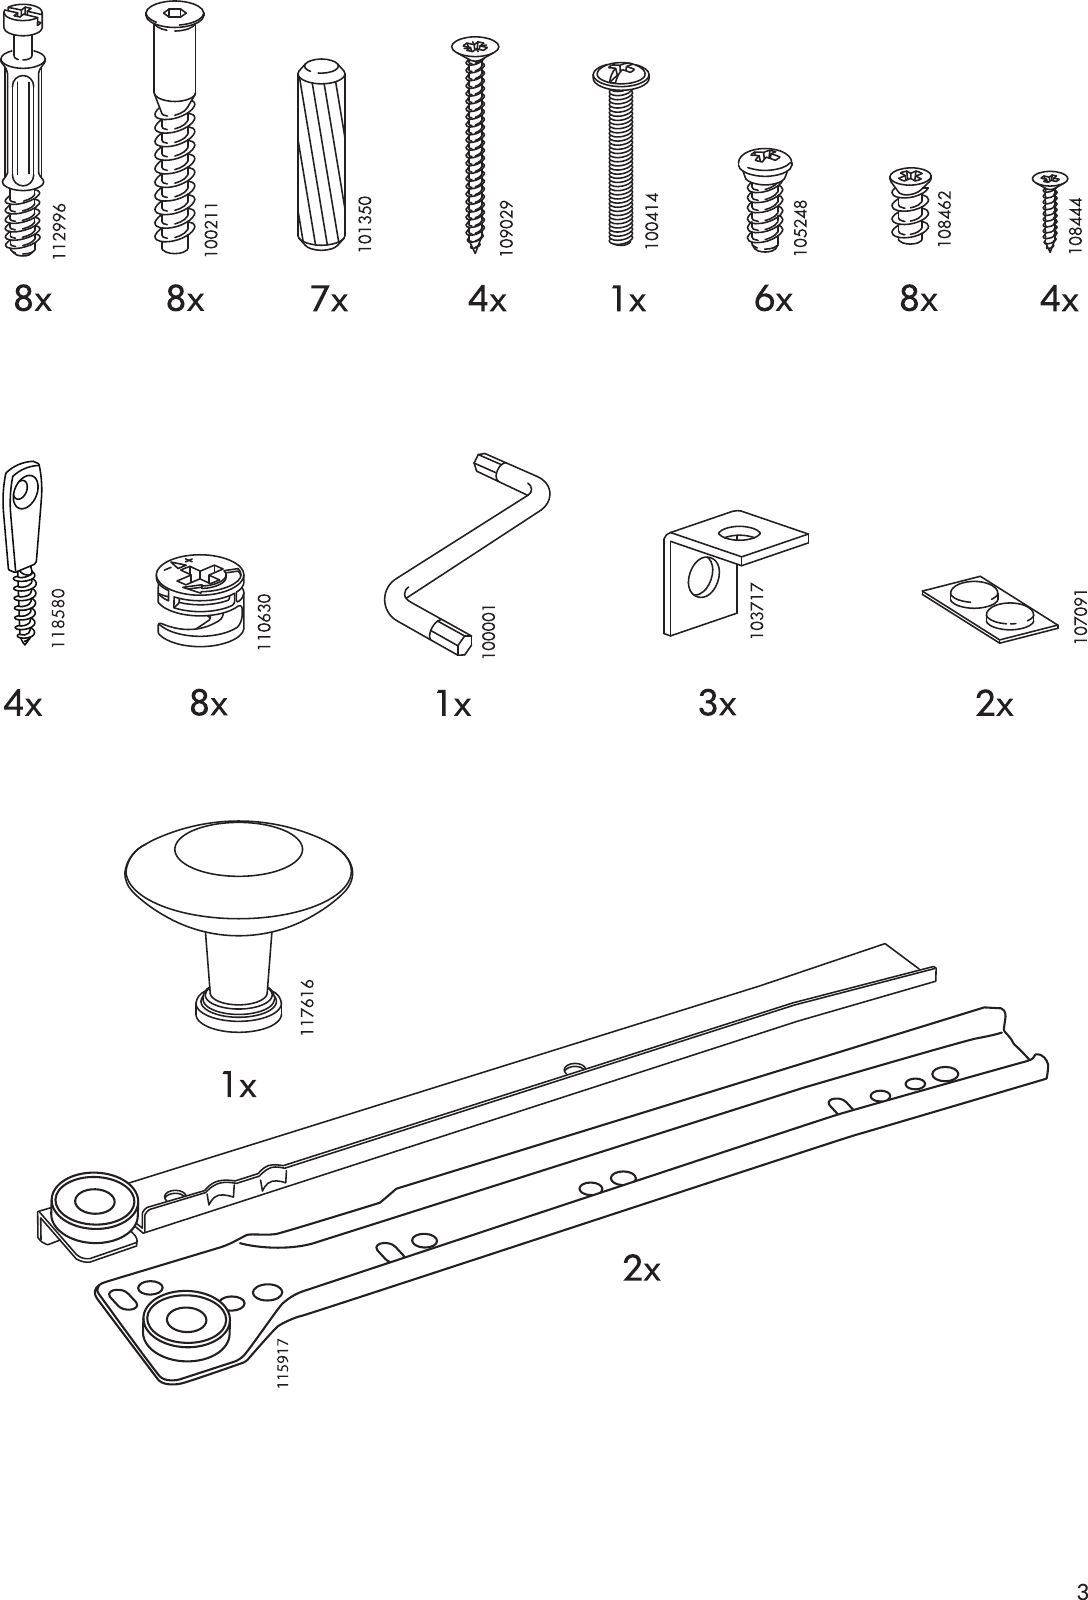 Page 3 of 12 - Ikea Ikea-Hemnes-Bedside-Table-17-Round-Assembly-Instruction